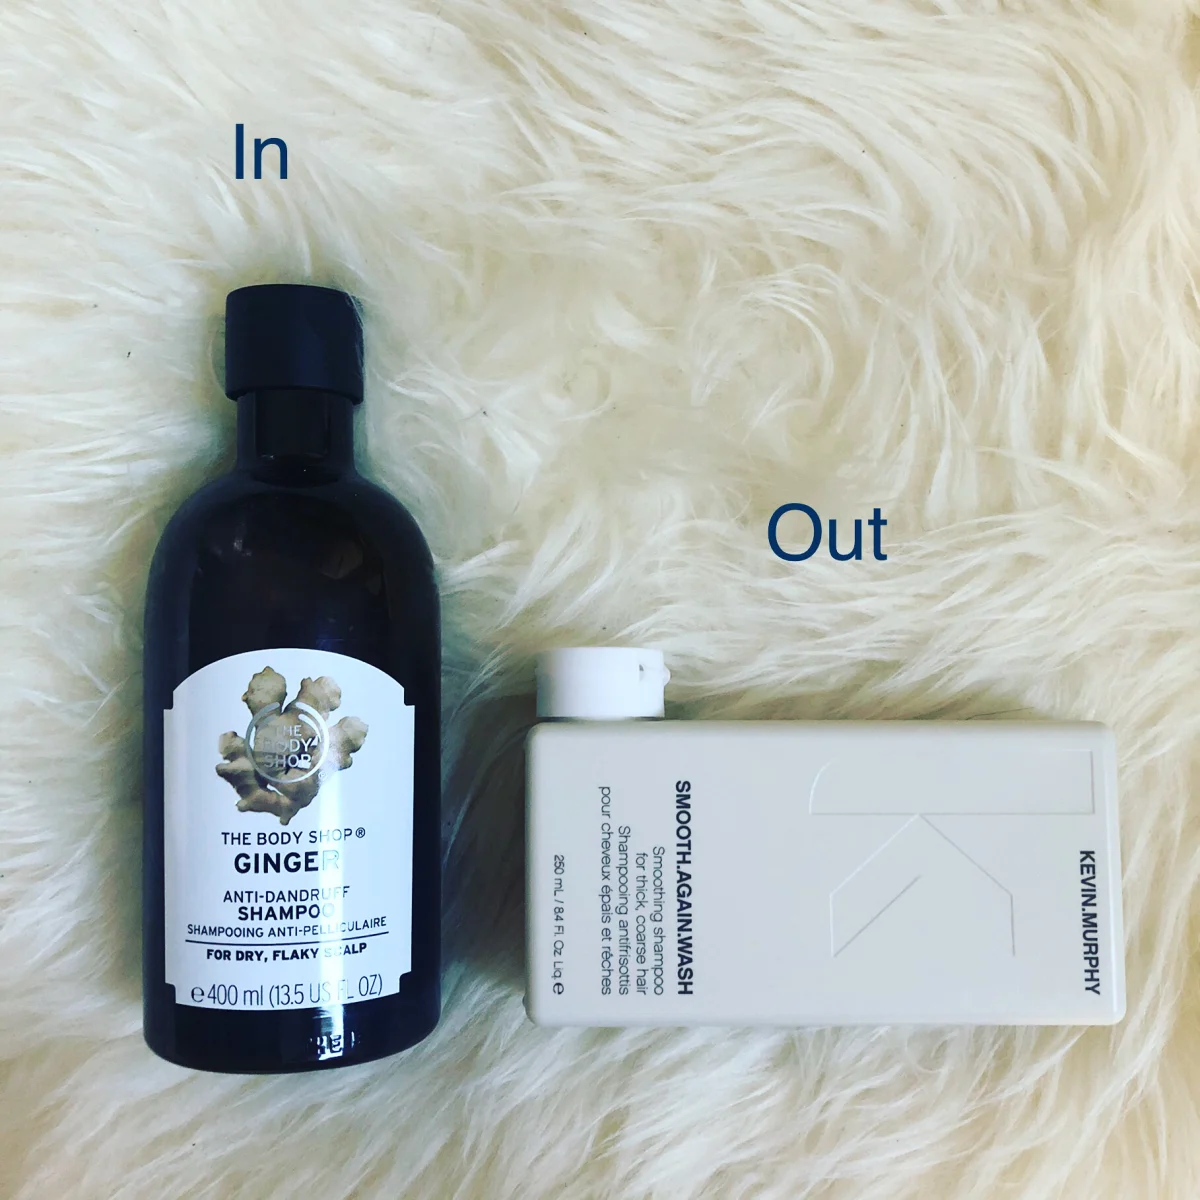 Kevin Murphy - YOUNG.AGAIN.WASH - review image